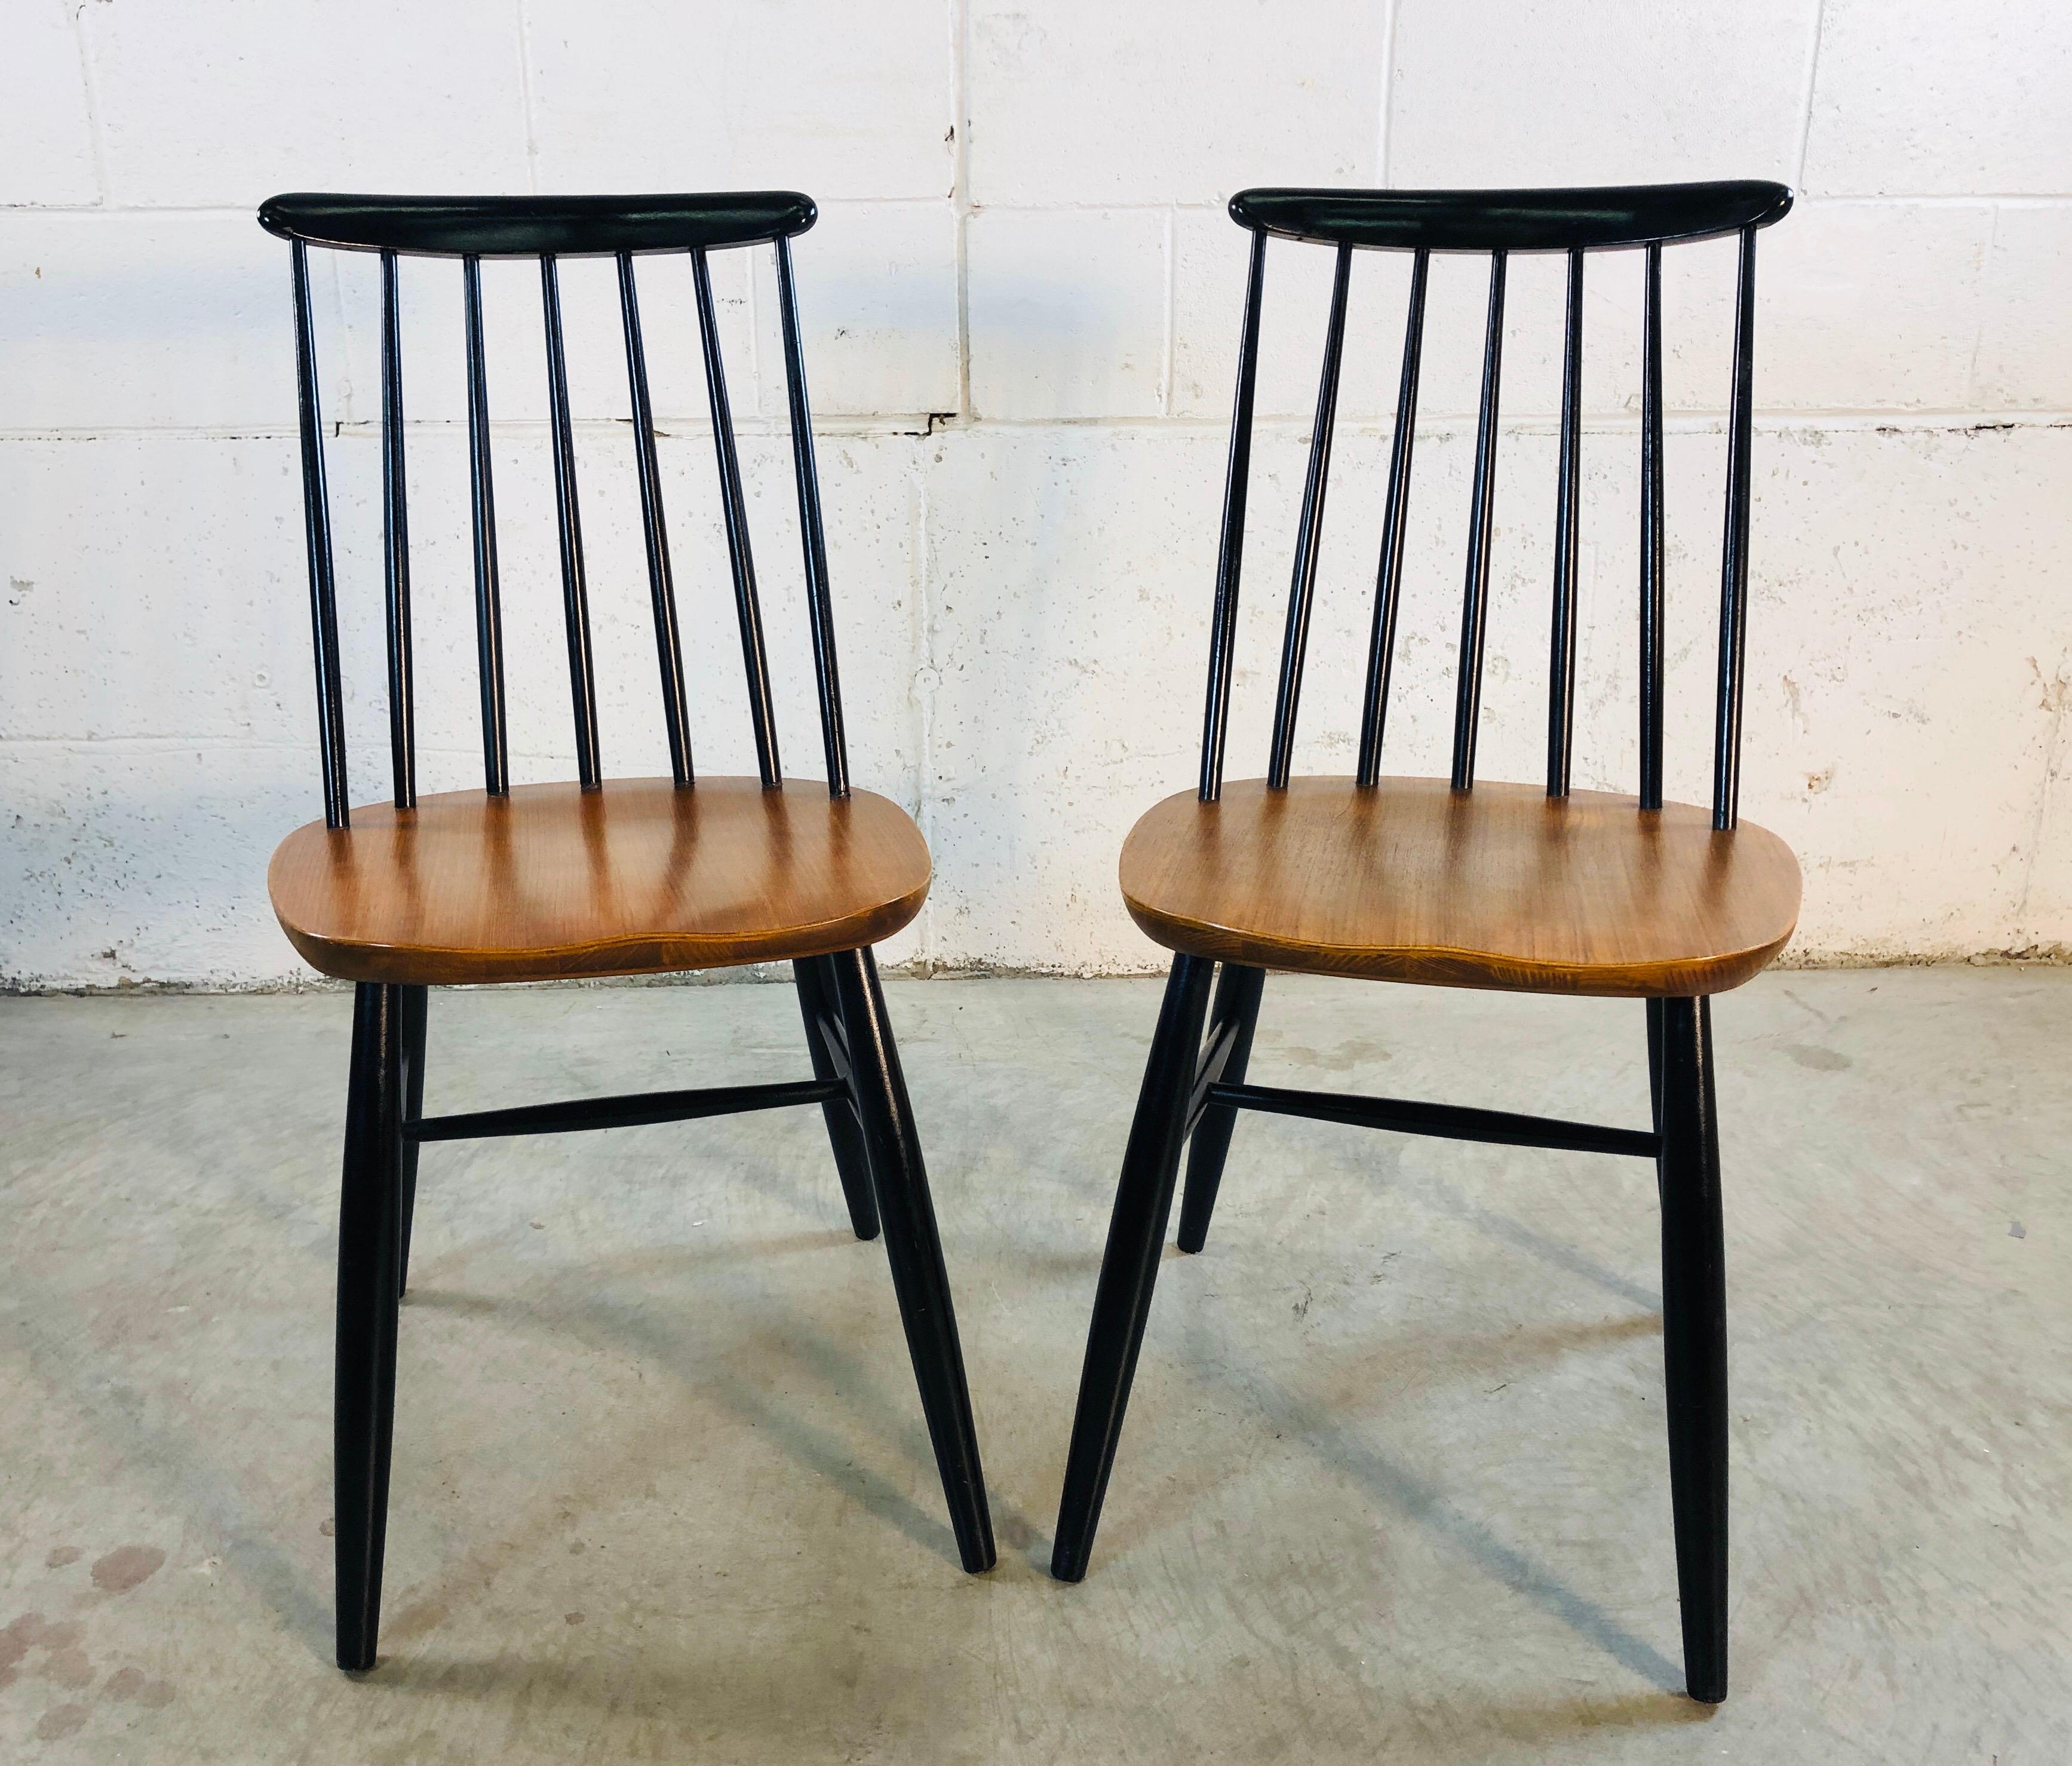 Vintage 1960s pair of spindle back teak and black painted dining chairs. The chairs are in refinished condition and are solid and sturdy. Marked Yugoslavia underneath. Measures: Seat 17.5” H.